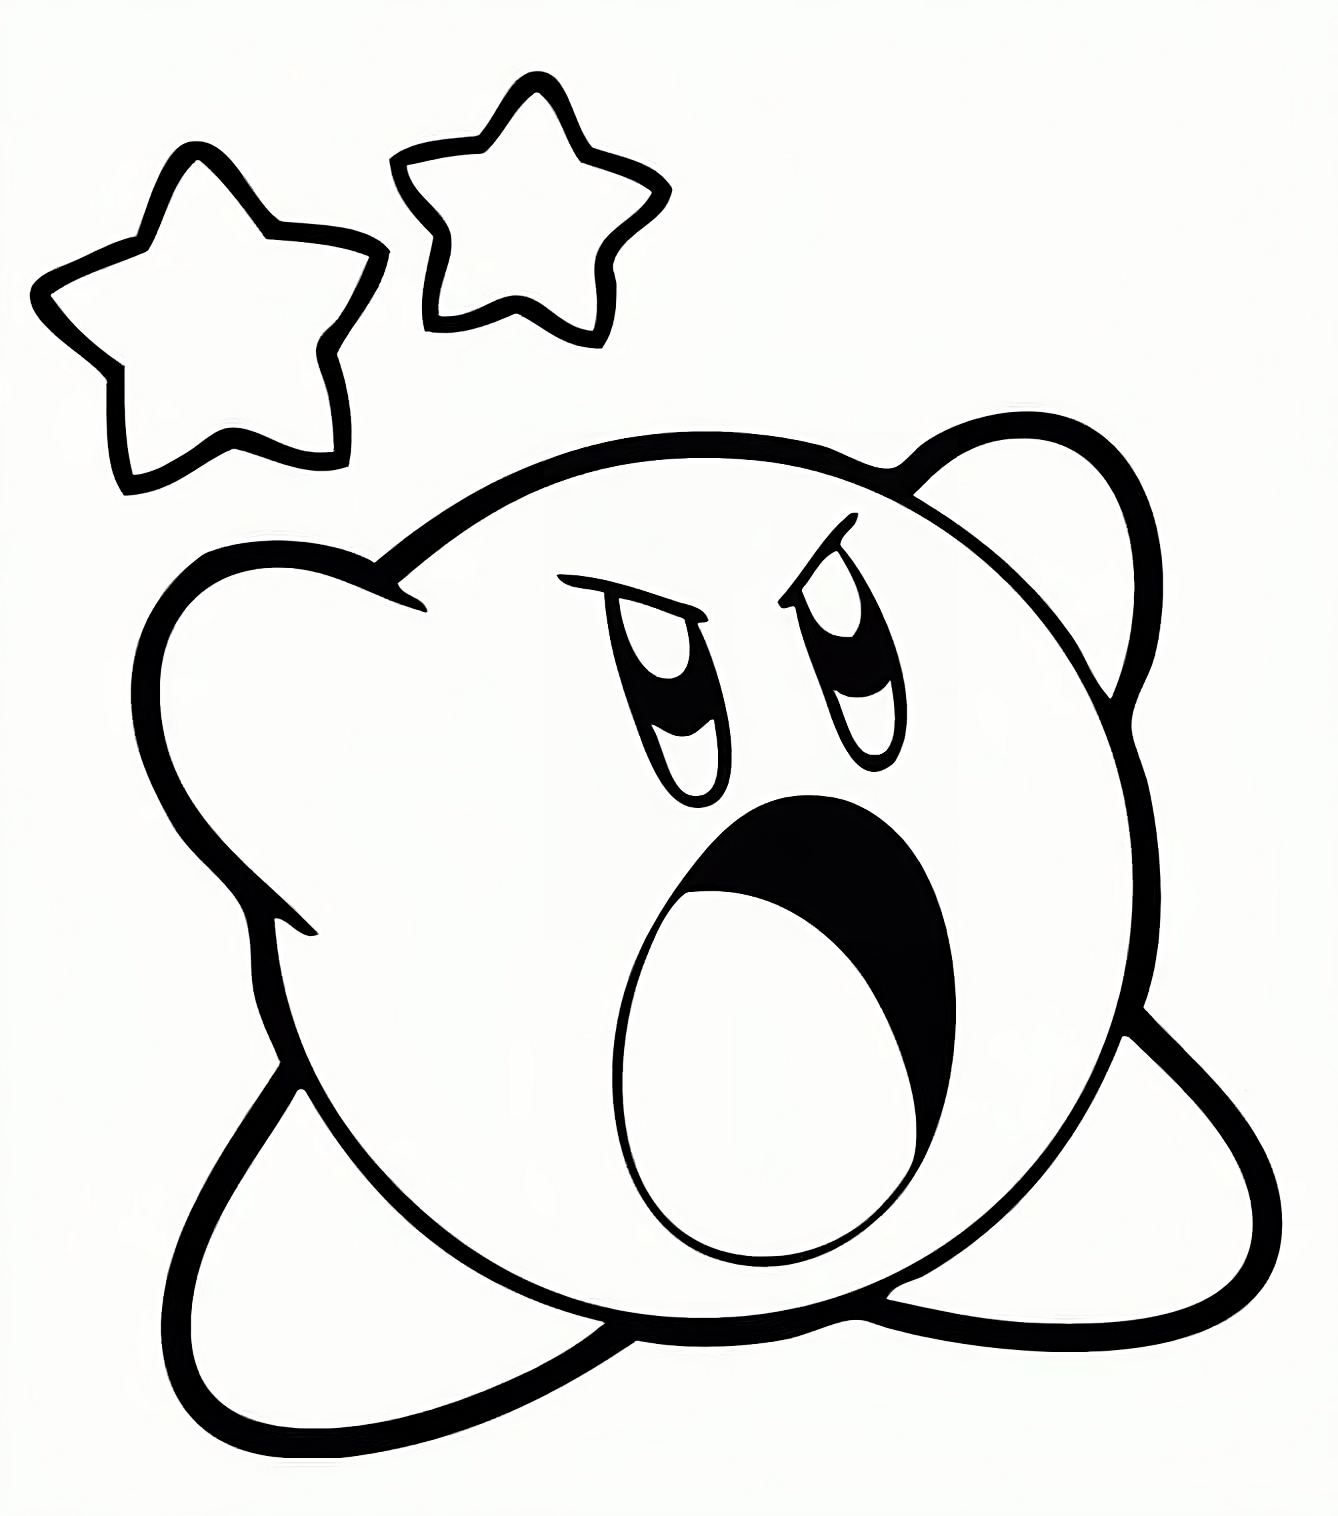 Kirby 13  coloring pages to print and coloring